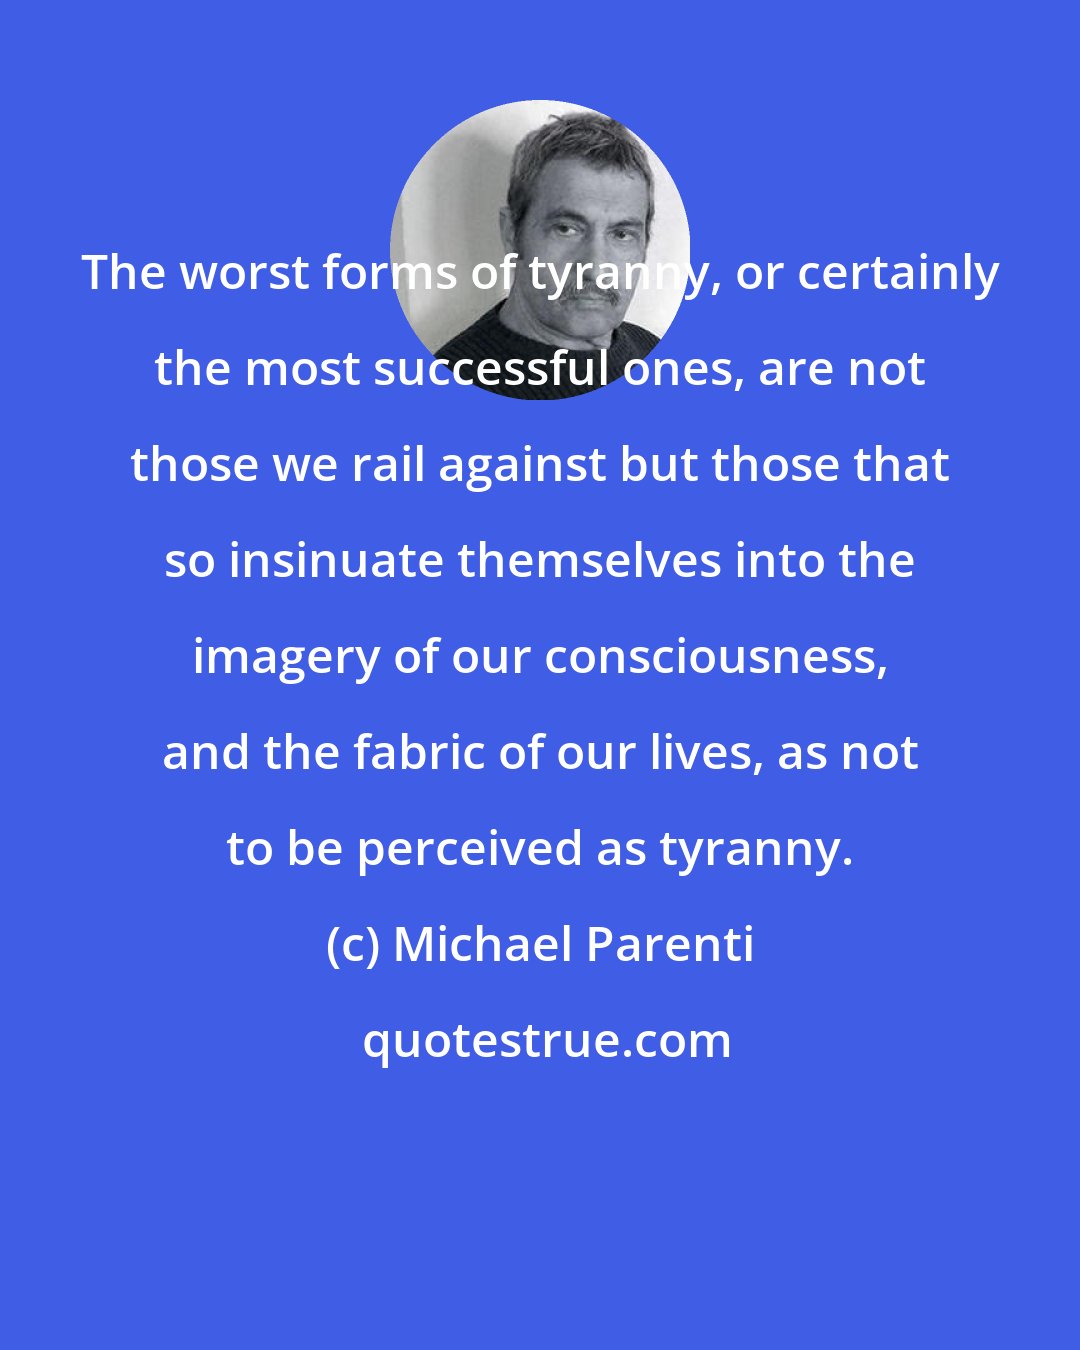 Michael Parenti: The worst forms of tyranny, or certainly the most successful ones, are not those we rail against but those that so insinuate themselves into the imagery of our consciousness, and the fabric of our lives, as not to be perceived as tyranny.